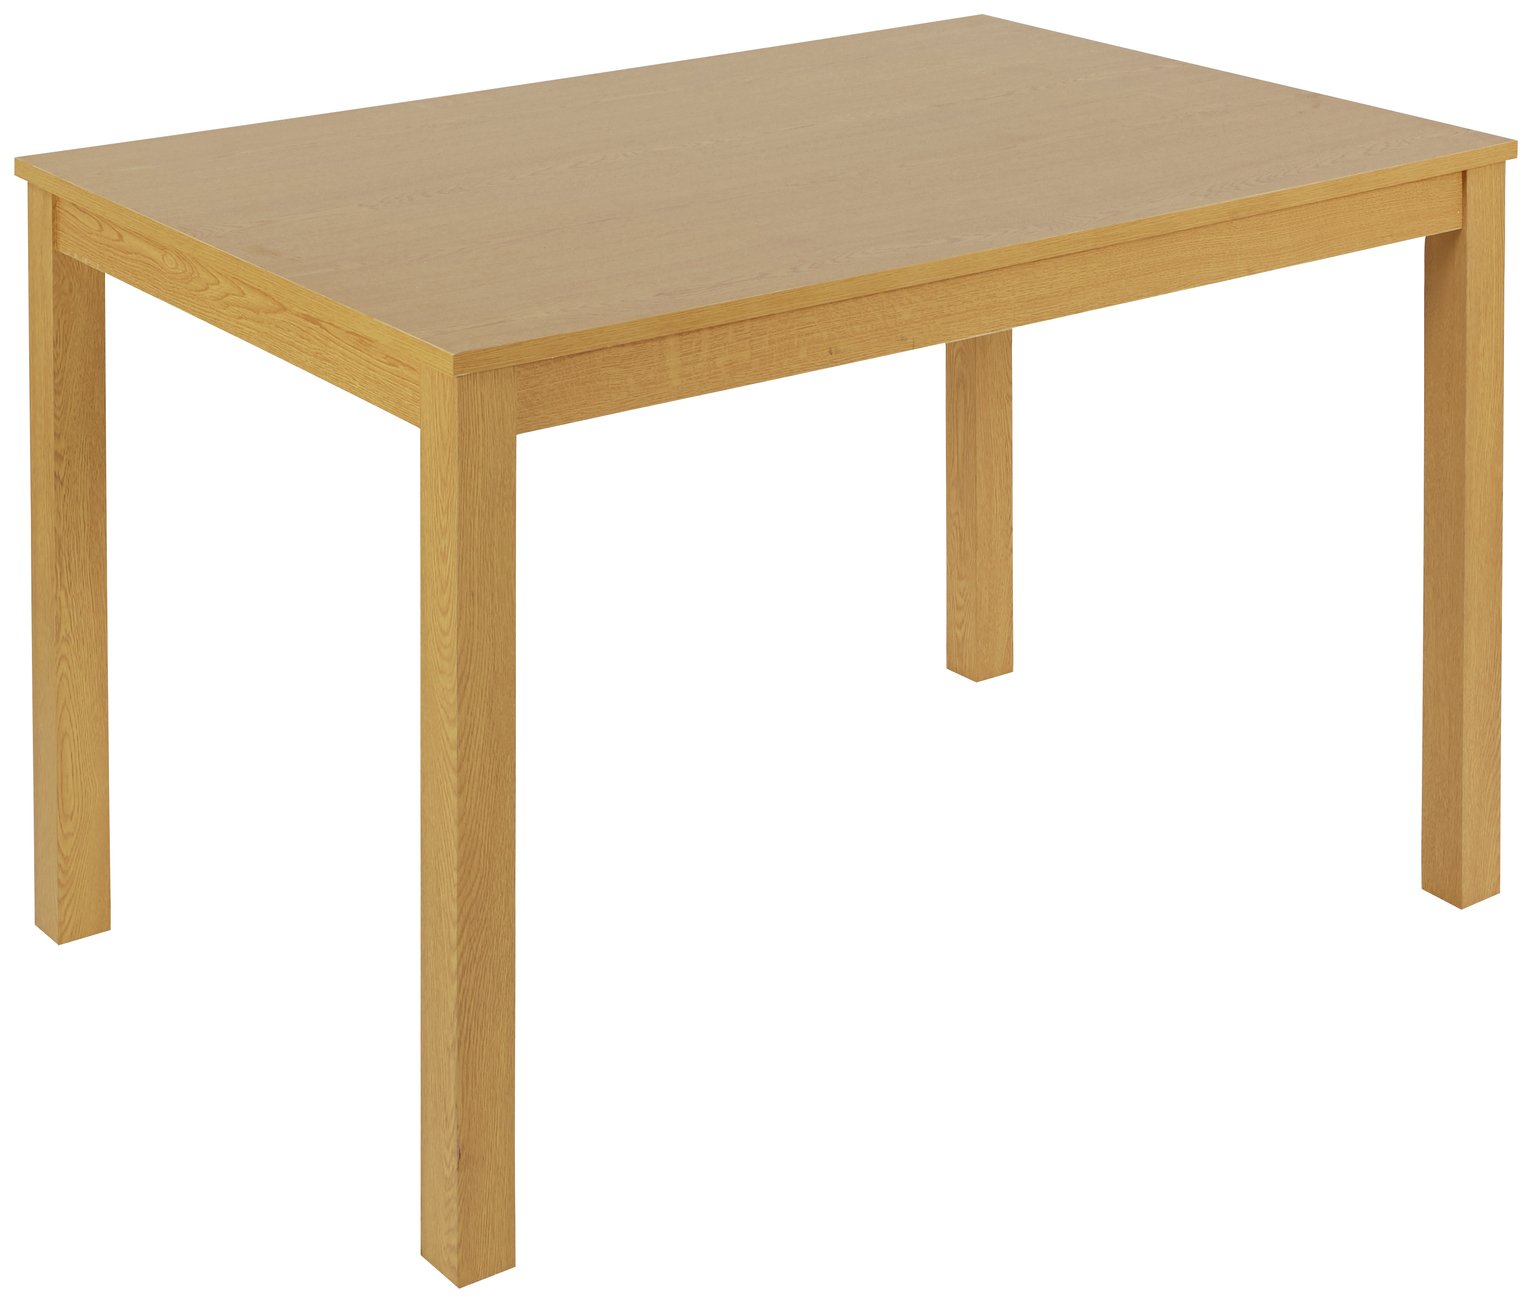 Argos Home Wood Effect 4 Seater Dining Table - Oak Effect